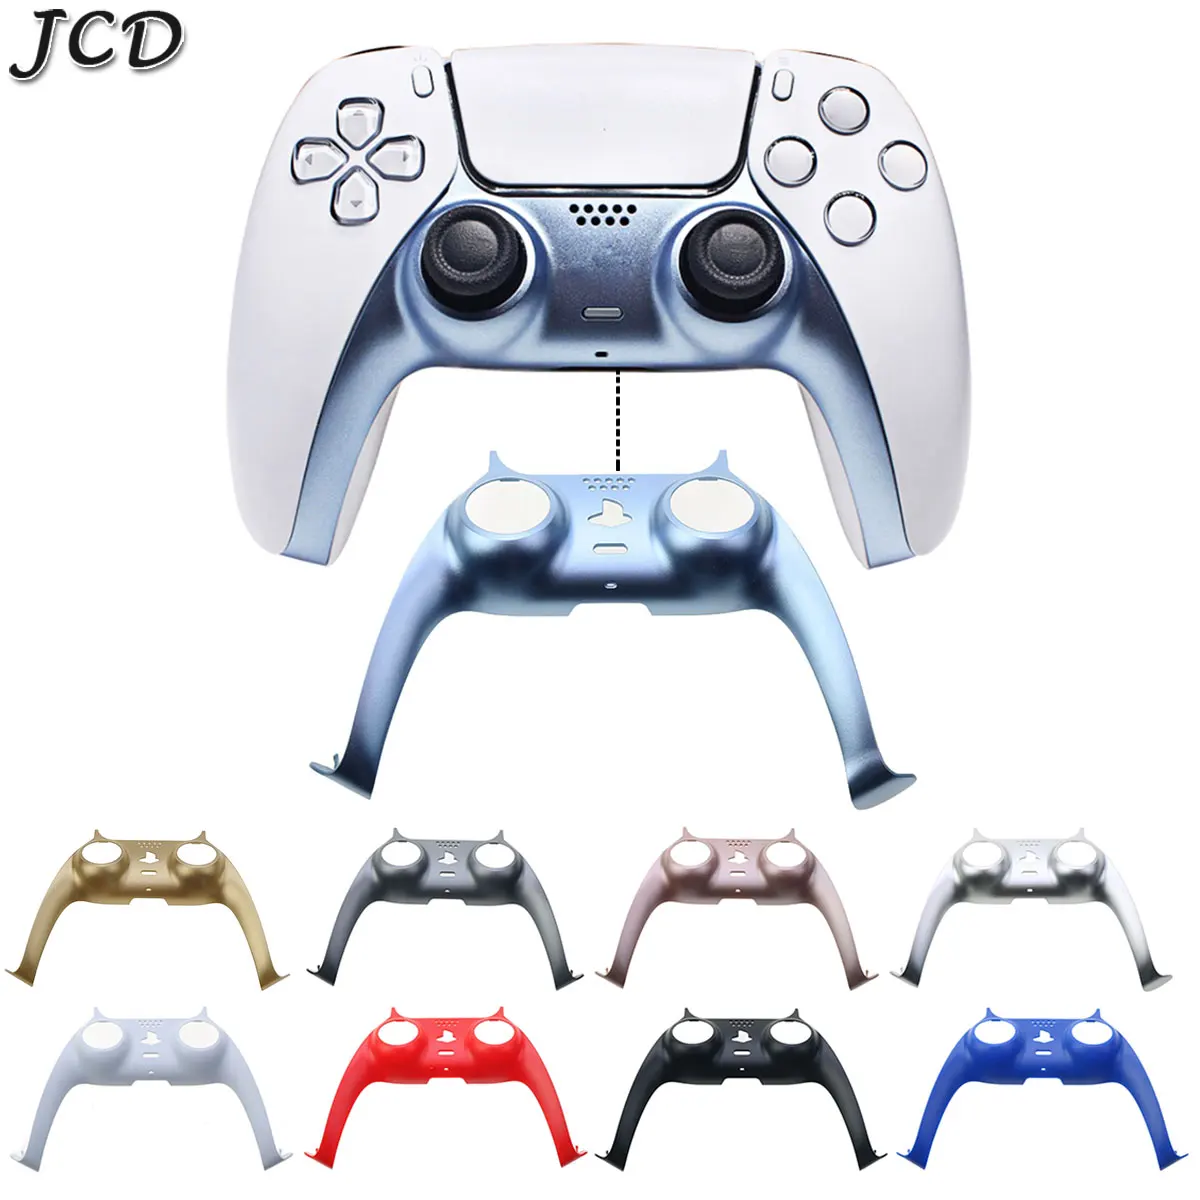 

JCD Decorative Strip For PS5 Controller Joystick Handle PC Decoration Strip For P5 Gamepad Controle Decorative Shell Cover